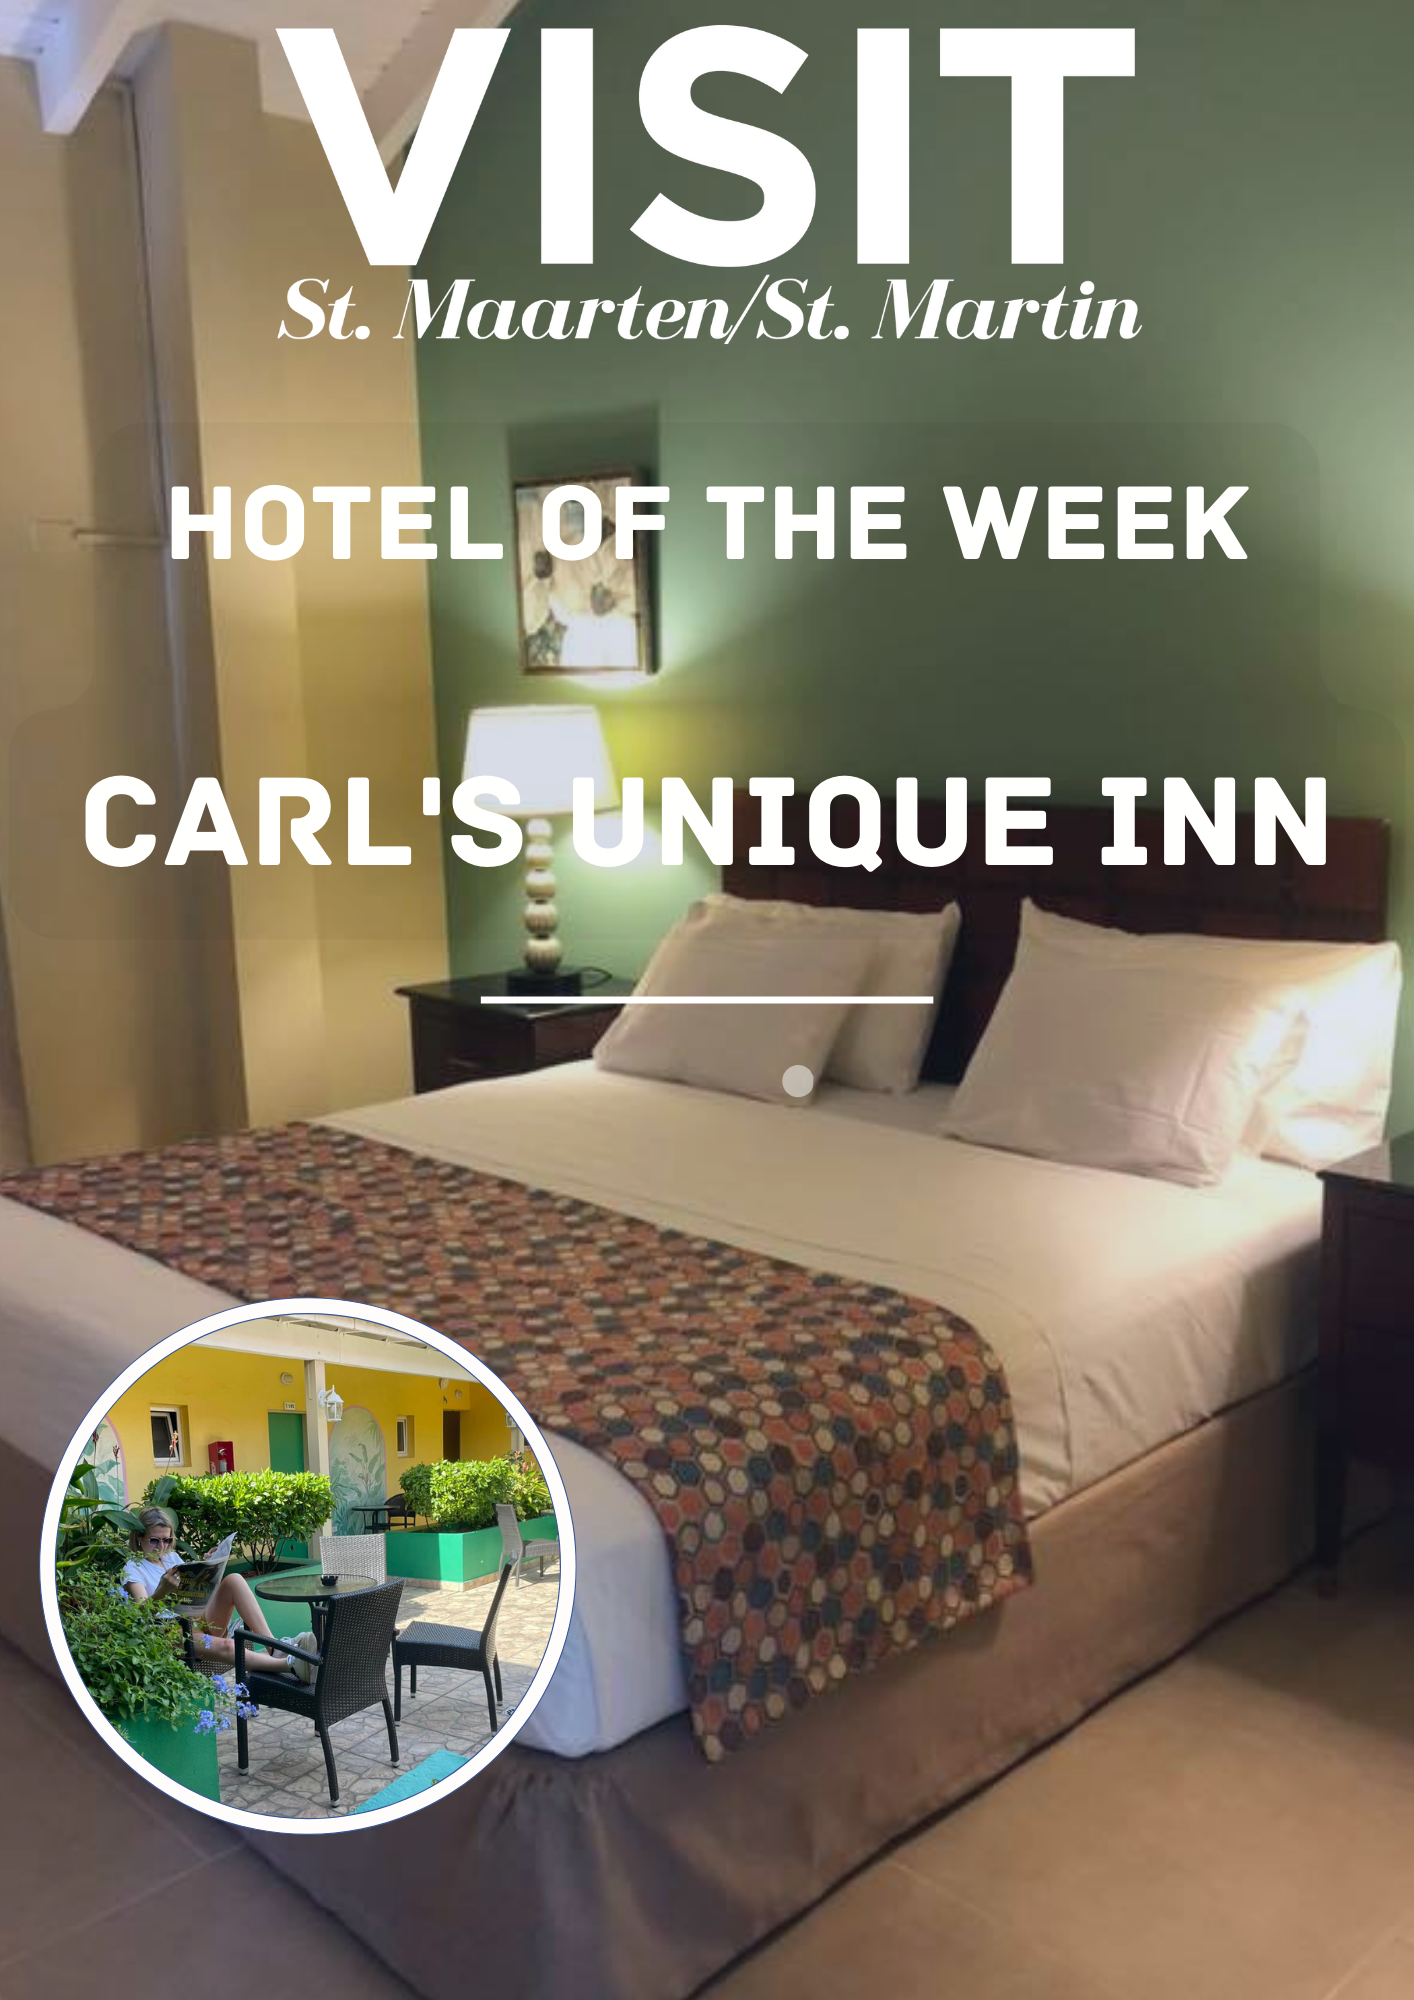 Carl's Unique Inn and conference facilities for hotel of the week